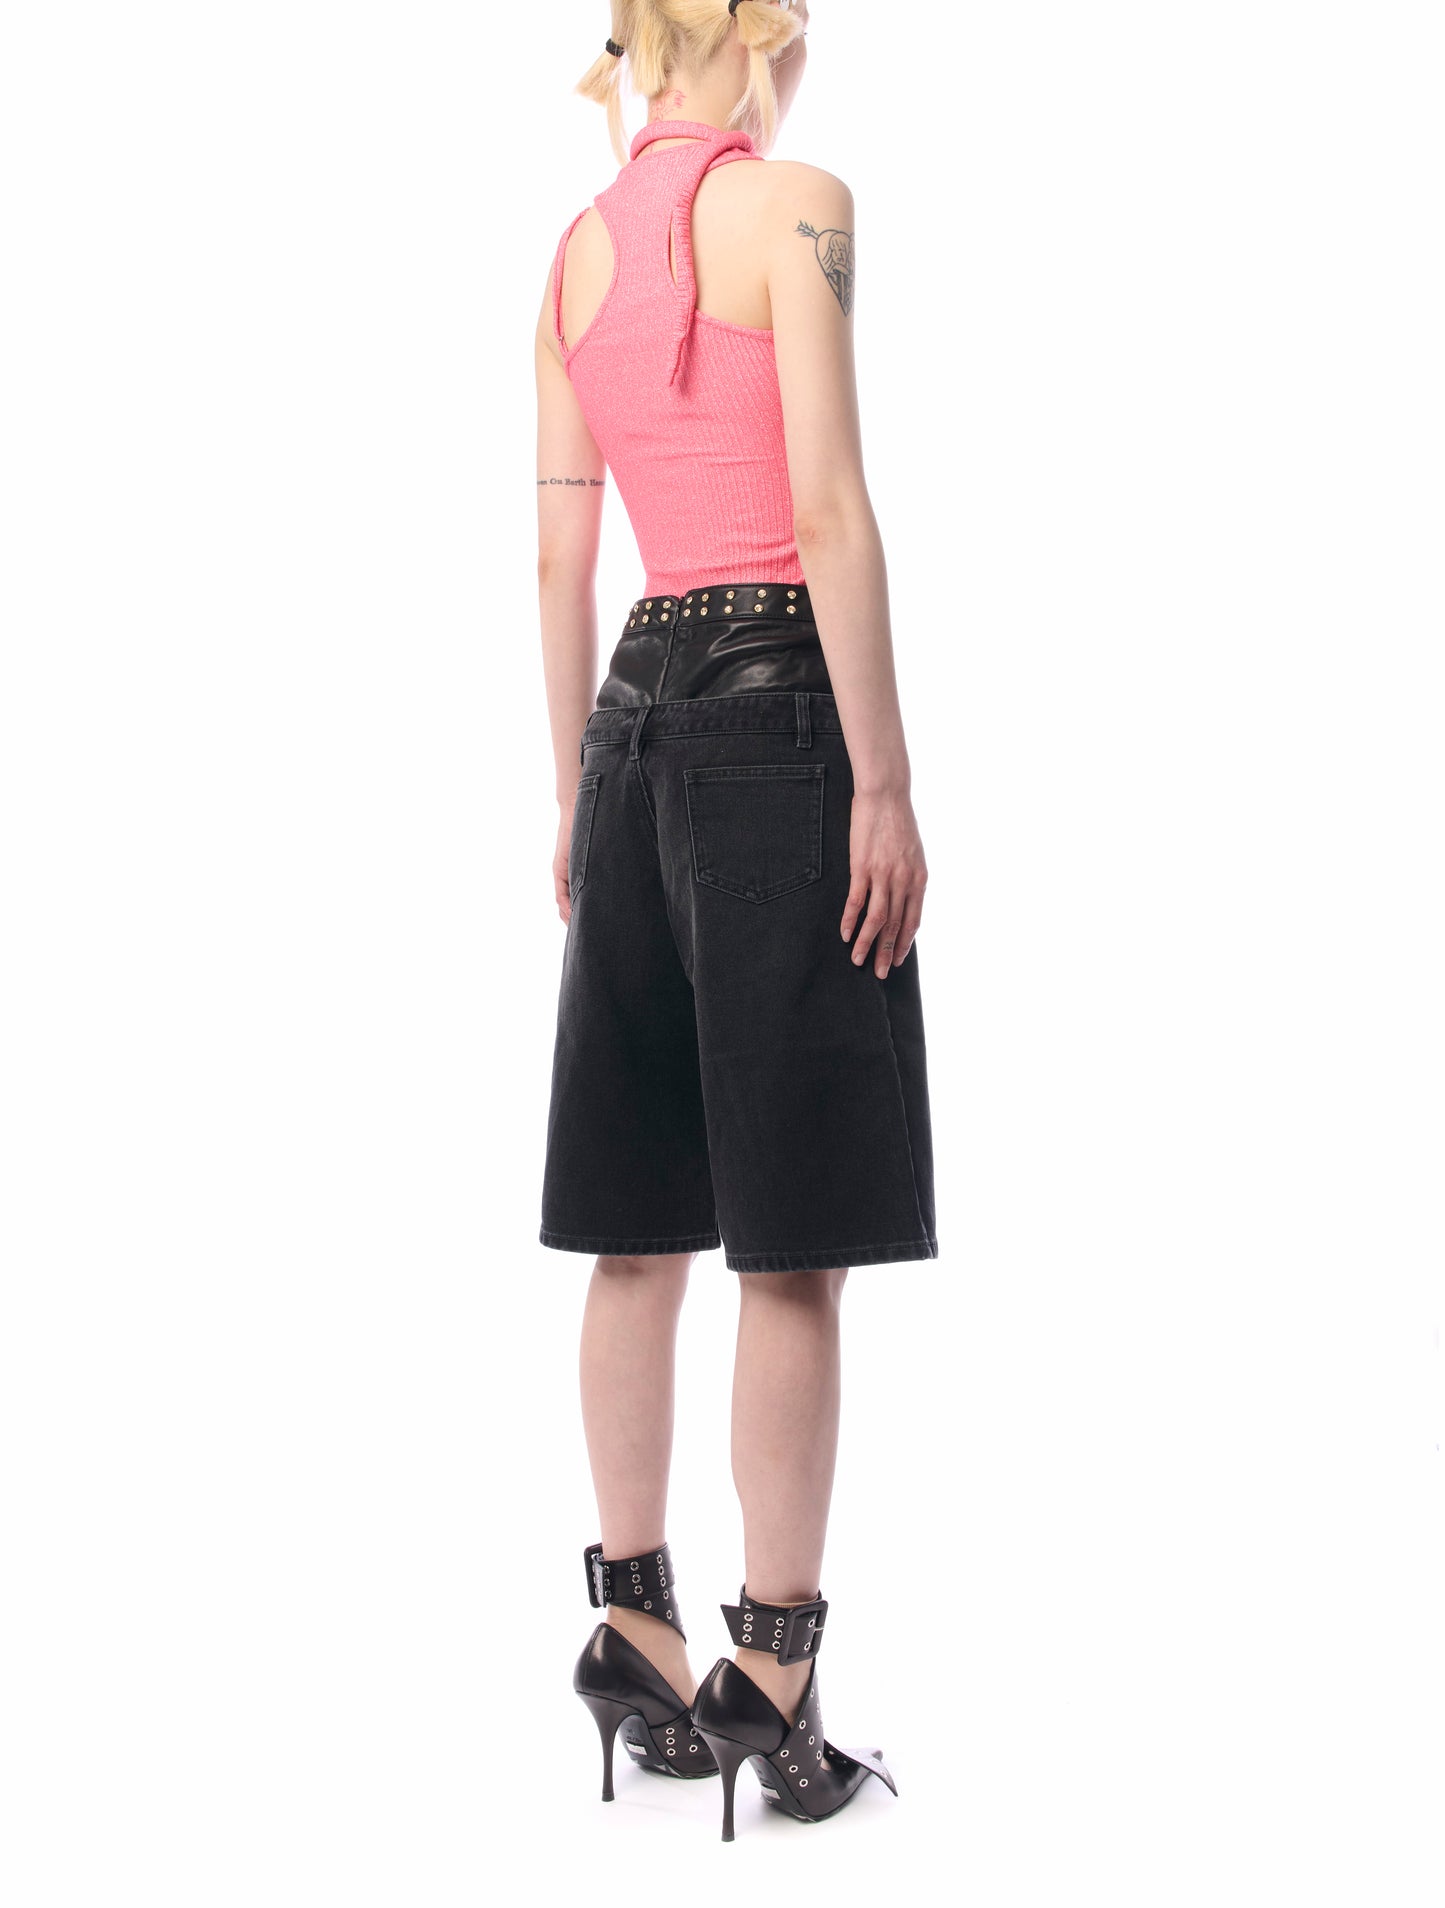 Ottolinger Layered Cut-Out Pink Tank Top